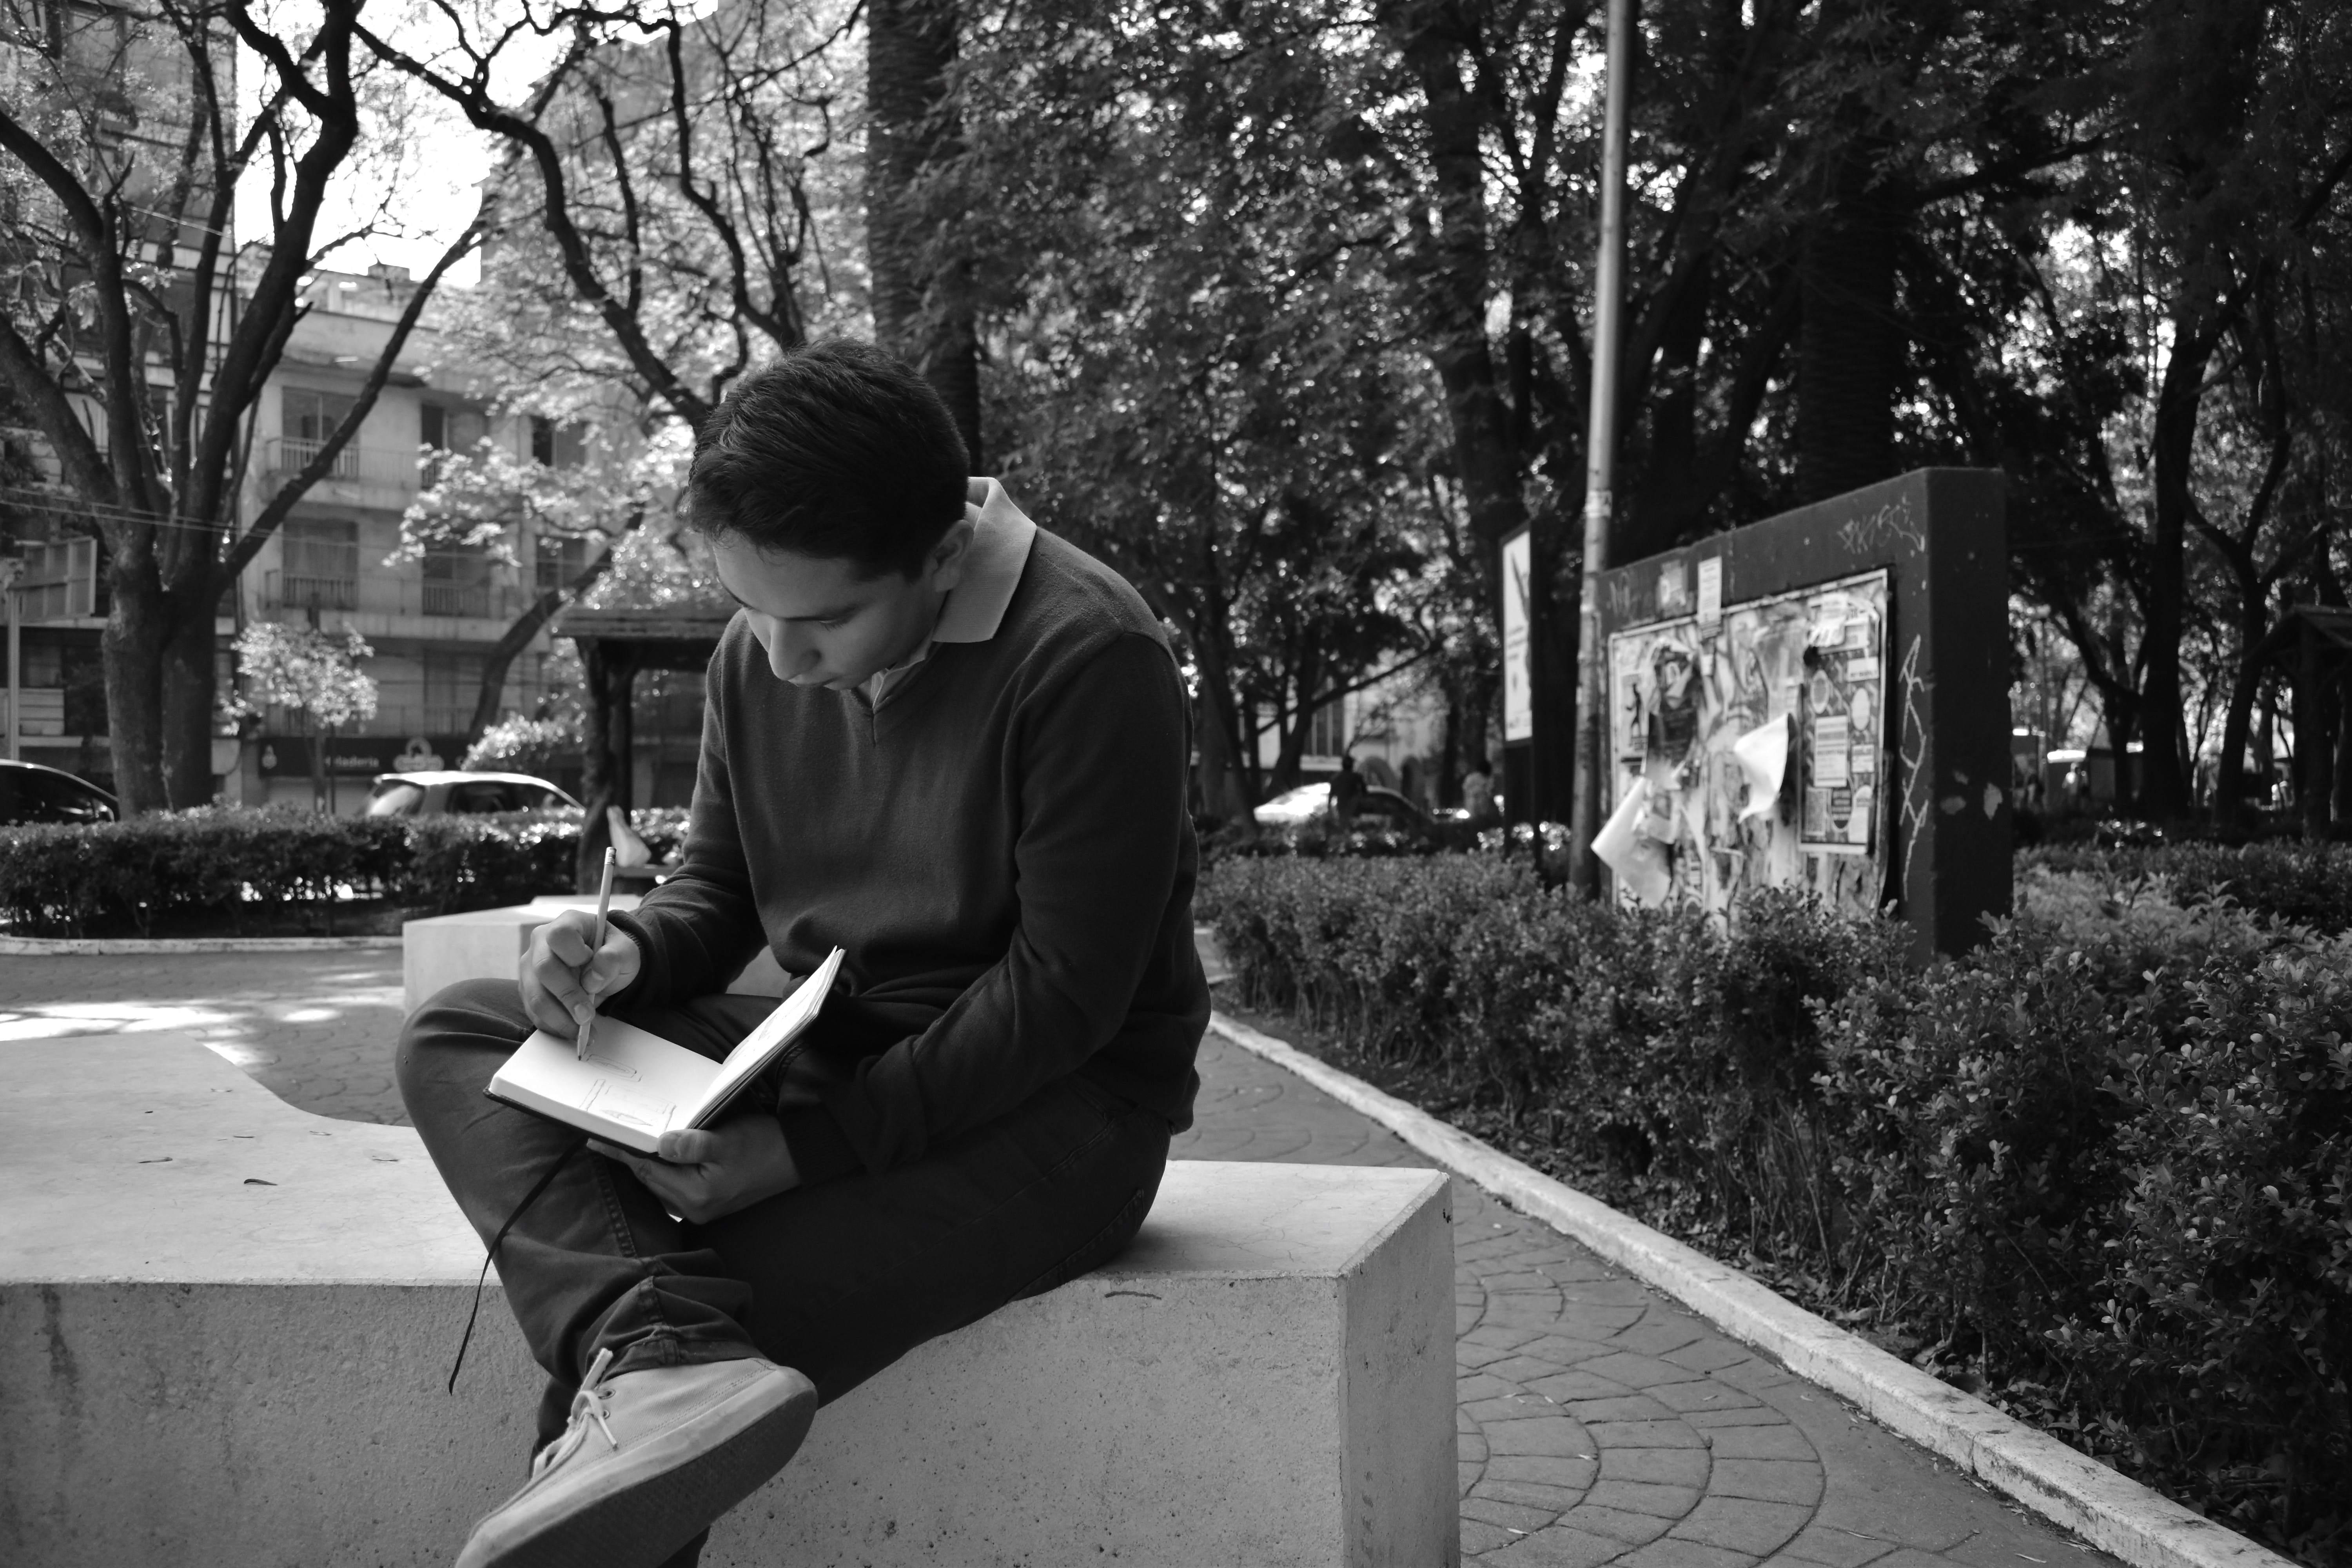 An individual writing in a notebook while sitting in a park.